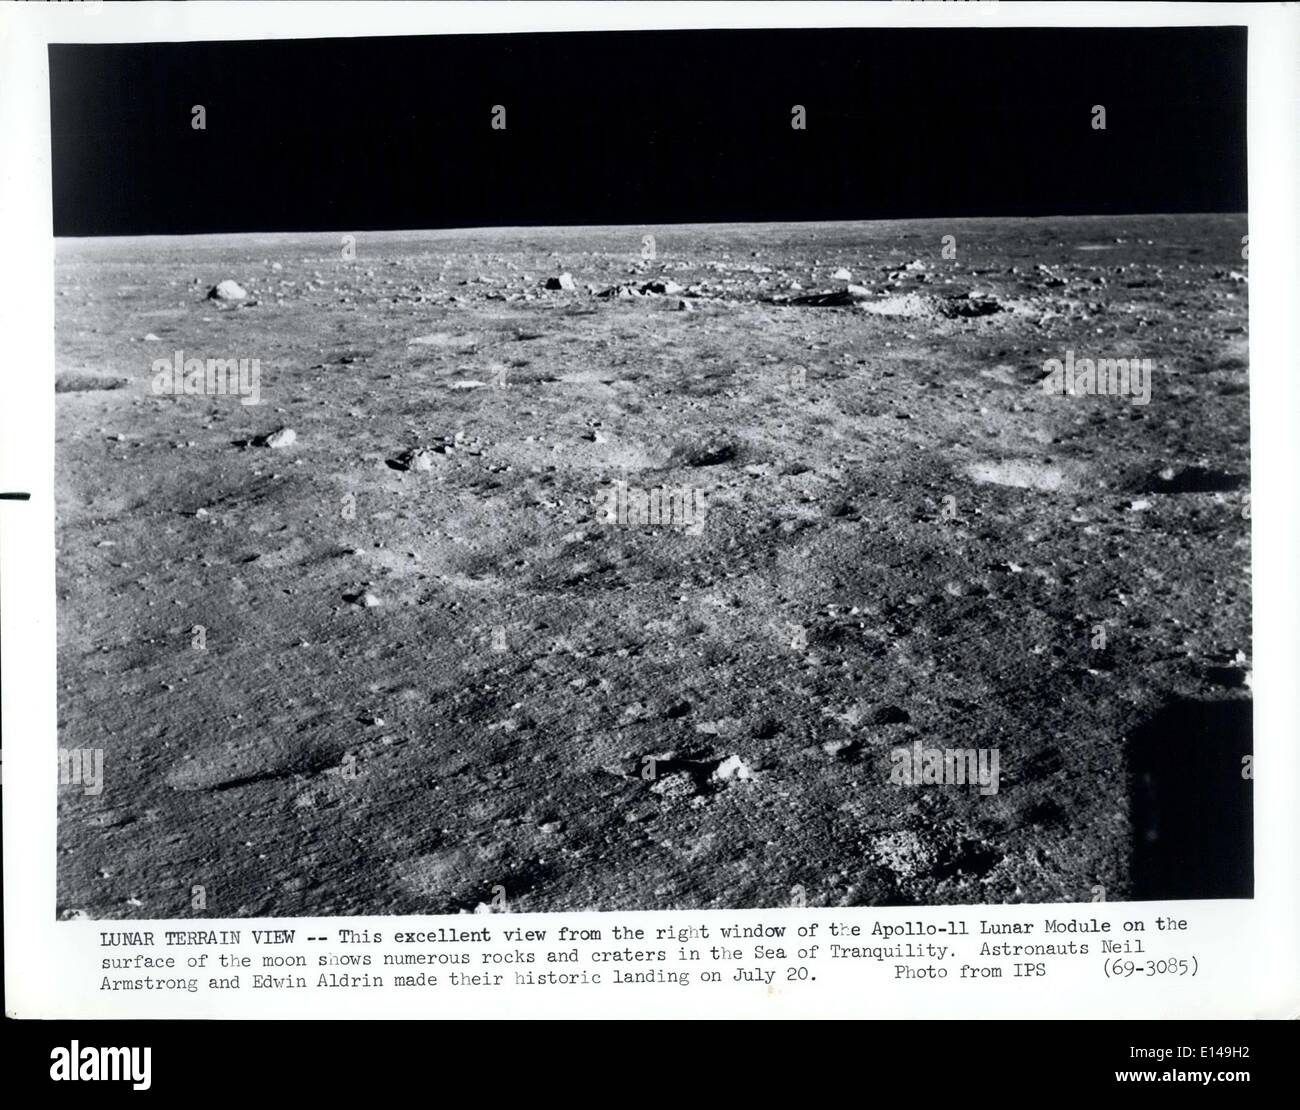 Apr. 17, 2012 - Lunar Terrain View: This excellent view from the right window of the Apollo-11 Lunar Module on the surface of the moon shows numerous rocks and craters in the Sea of Tranquility. Astronauts Neil Armstrong and Edwin Aldrin made their historic landing on July 20. Stock Photo